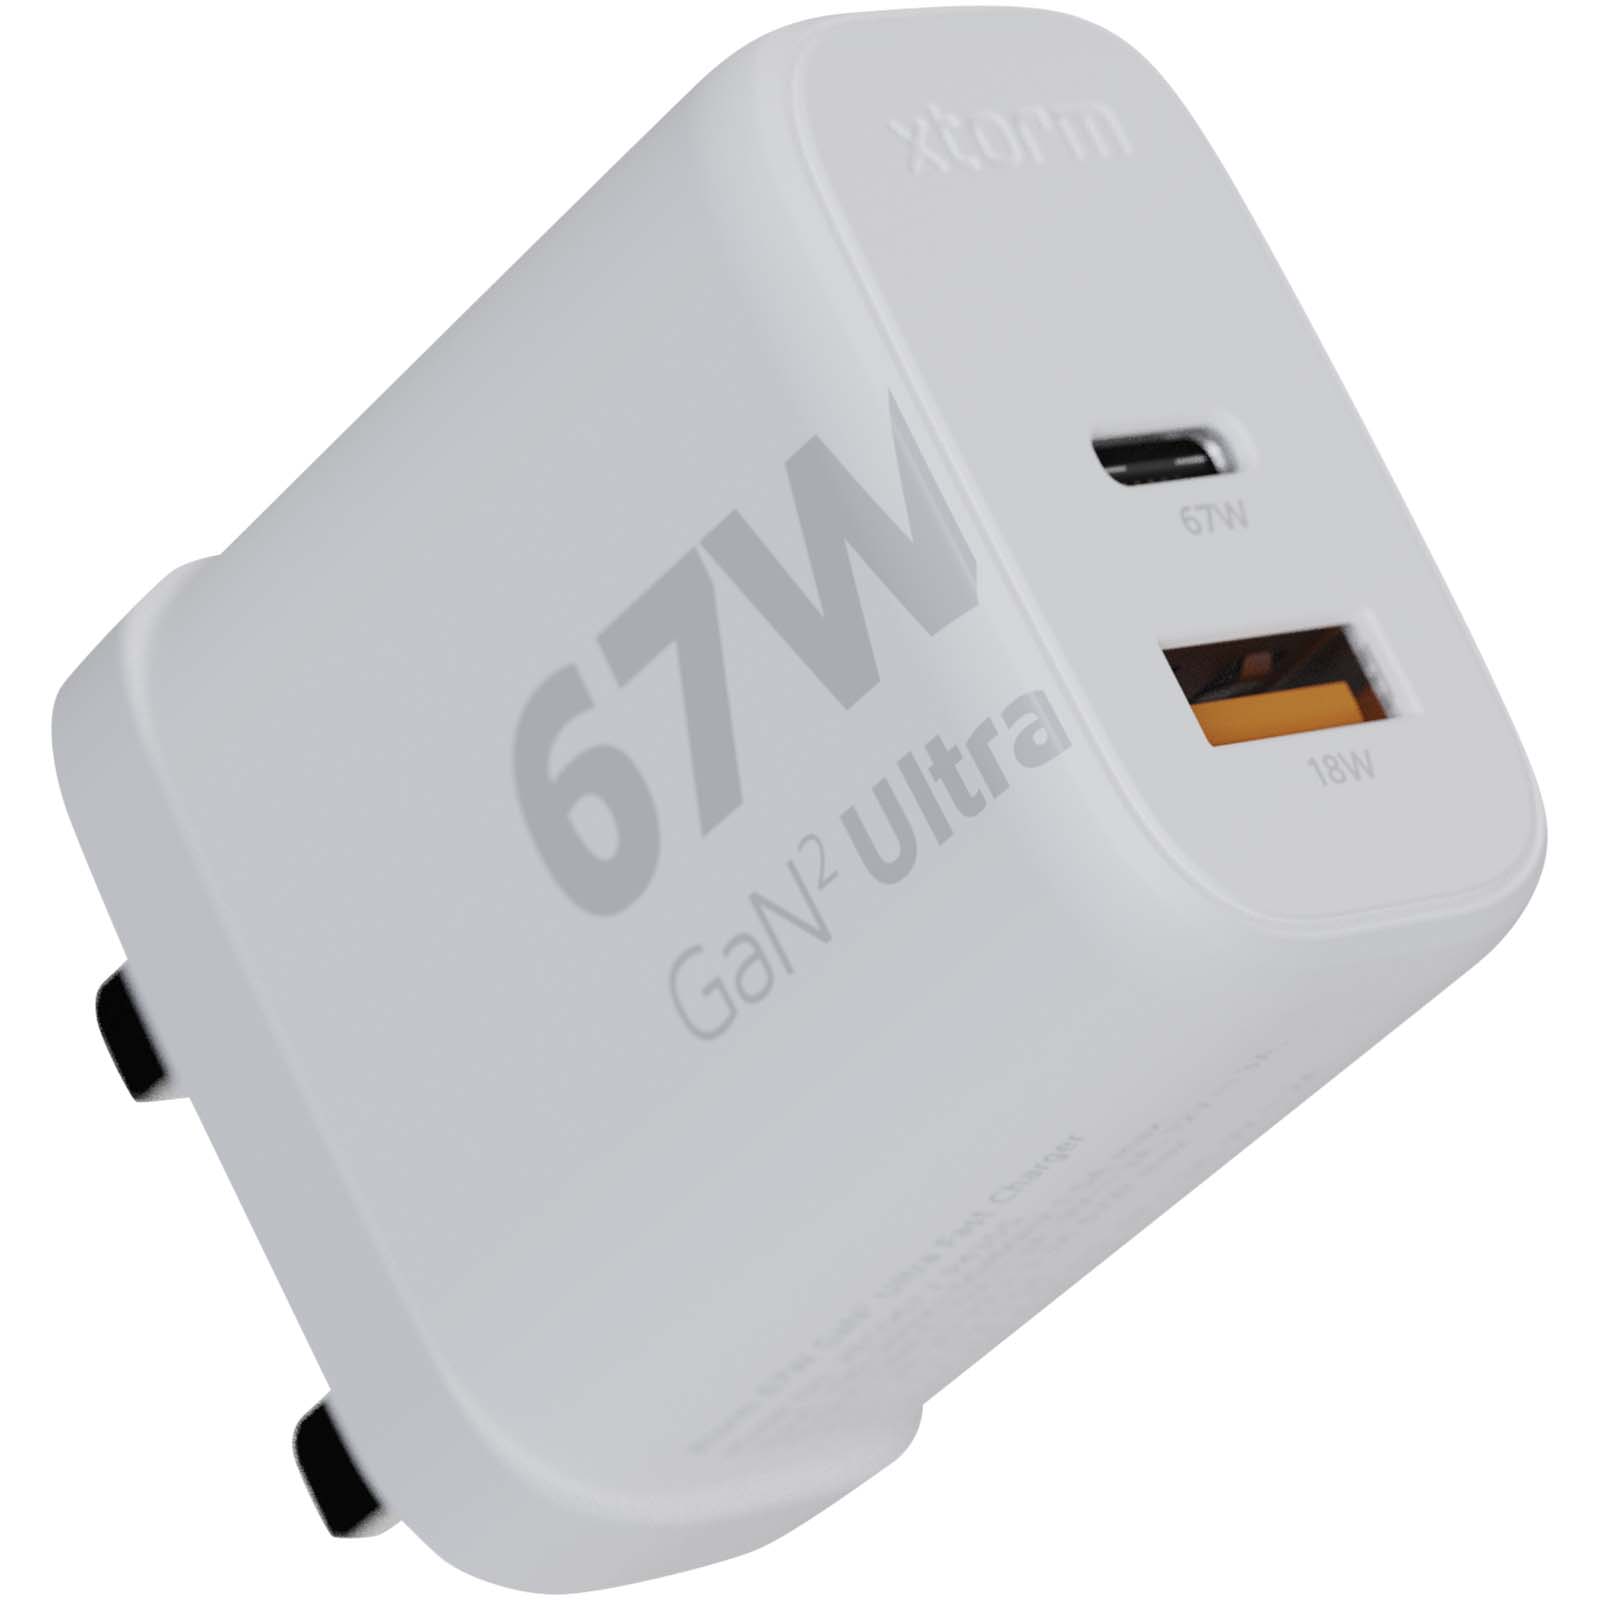 Advertising Chargers - Xtorm XEC067G GaN² Ultra 67W wall charger - UK plug